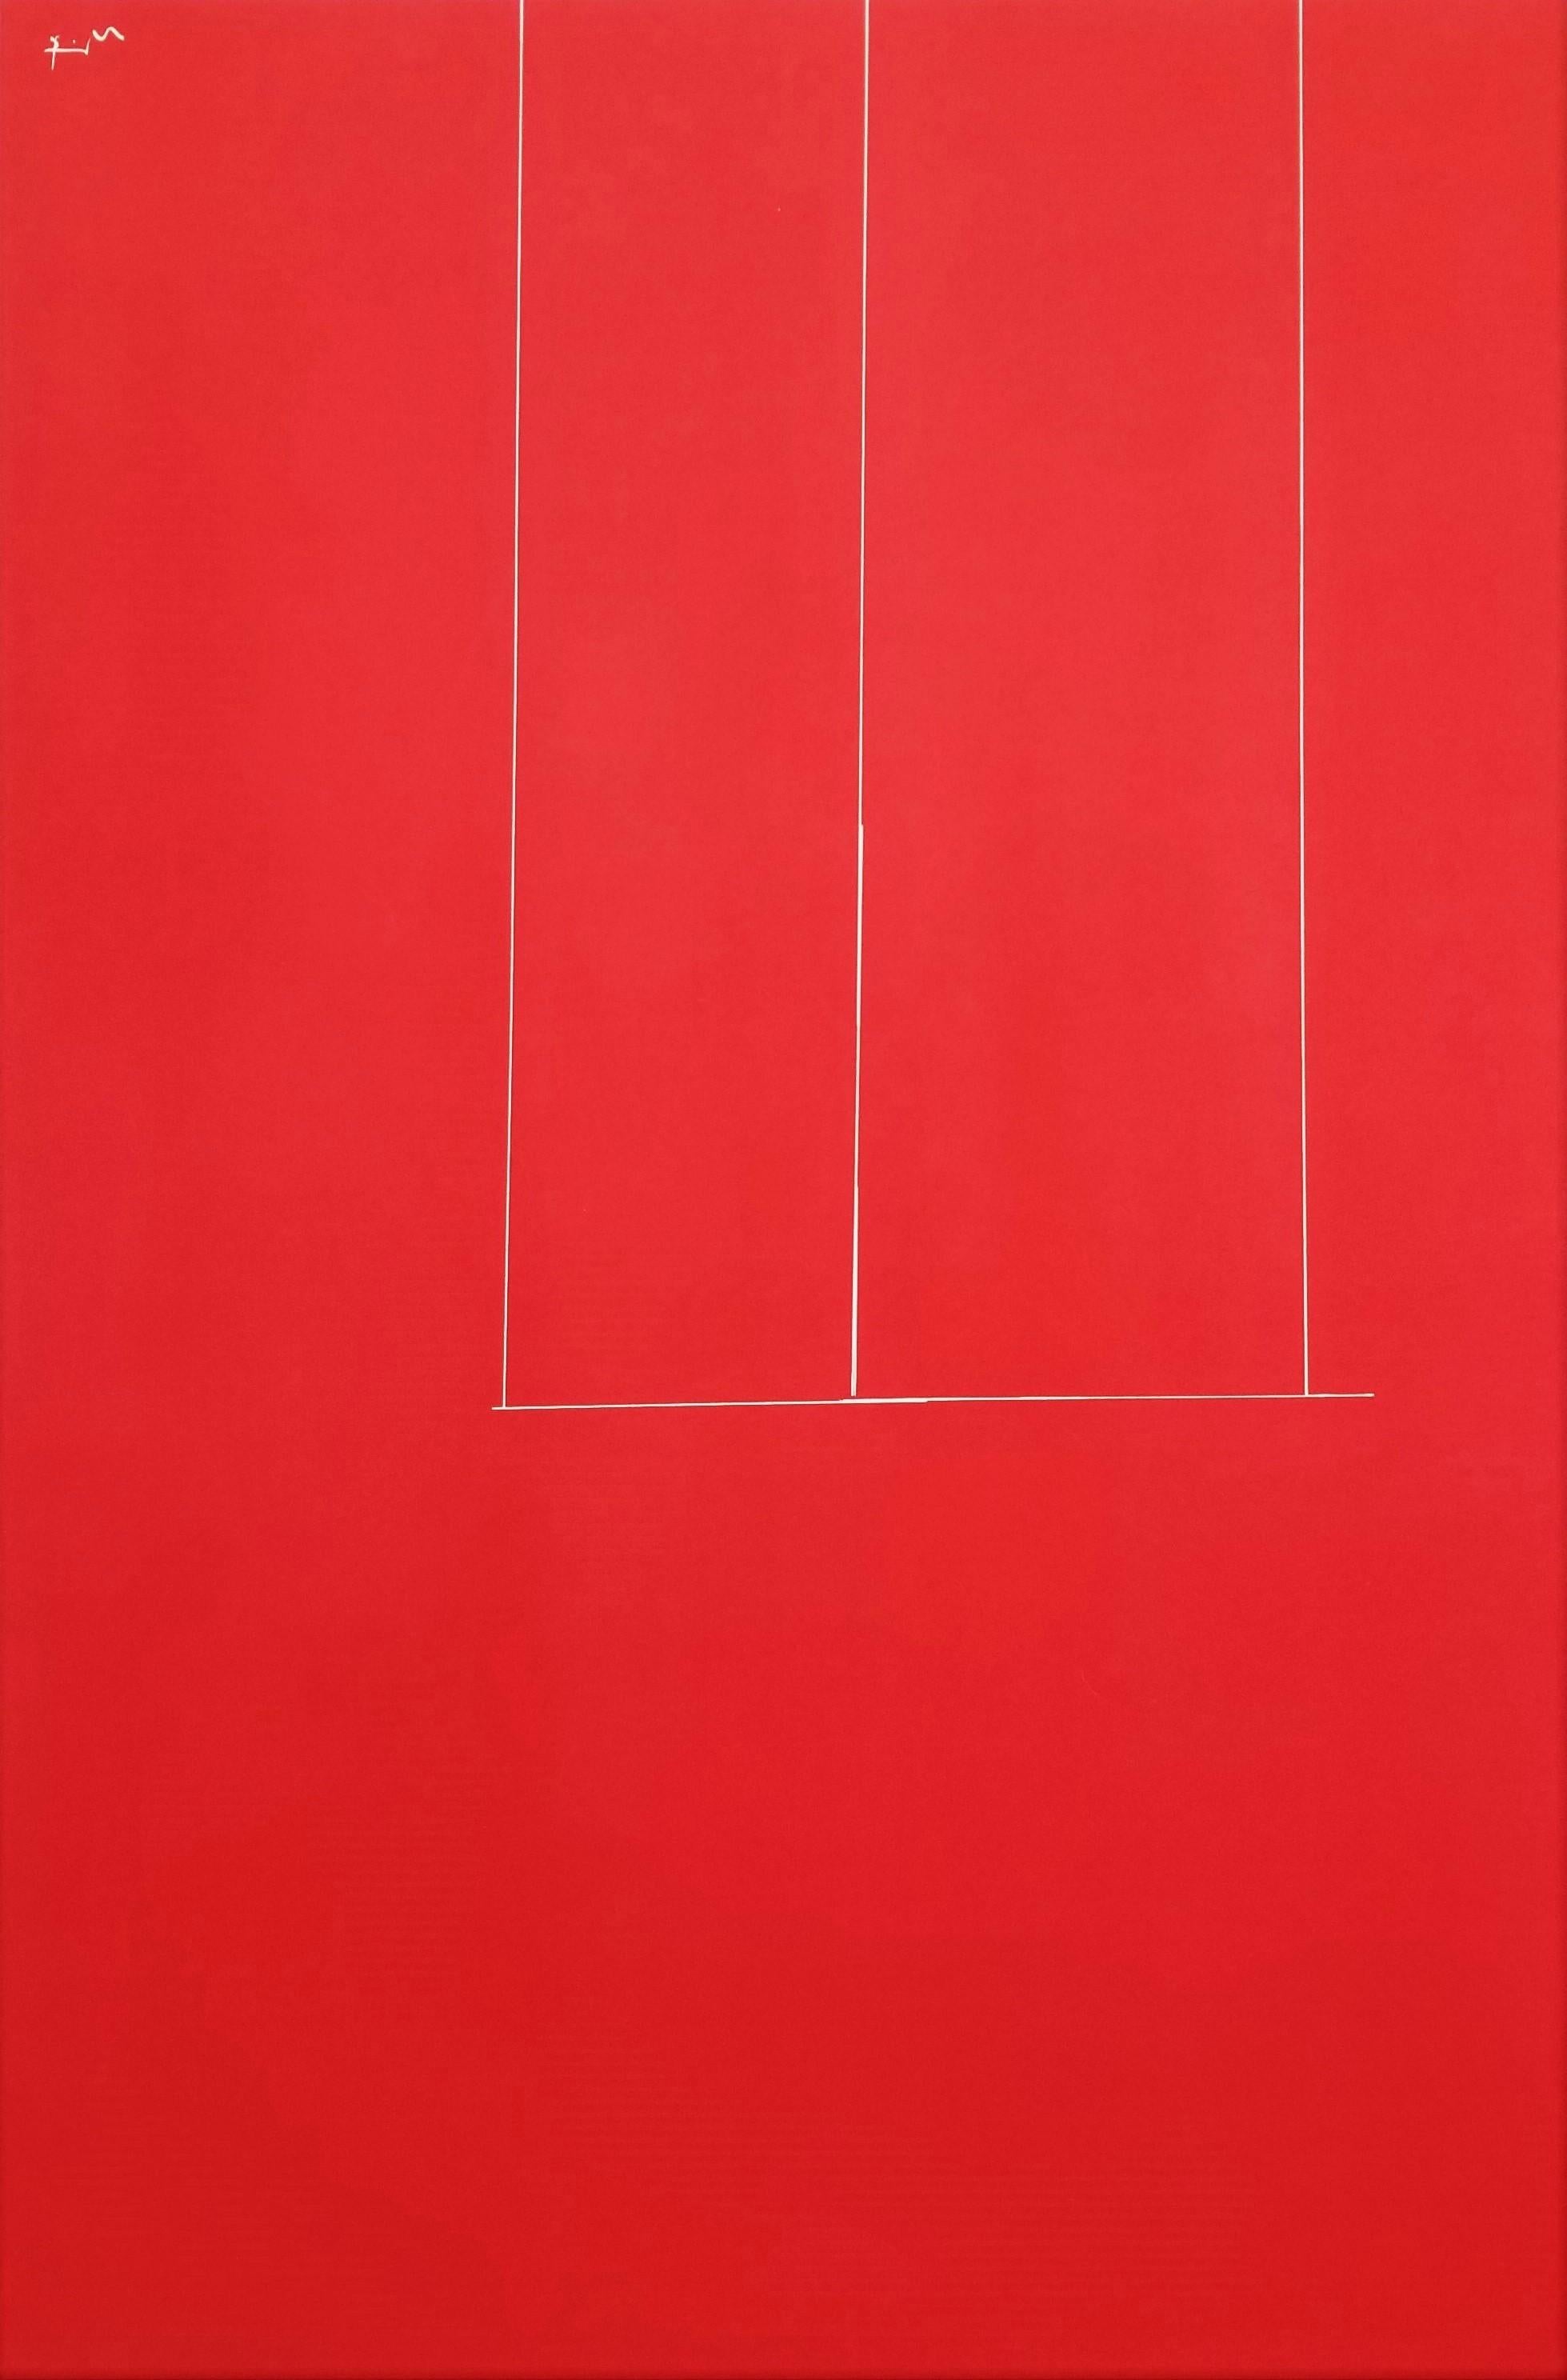 Artist: Robert Motherwell (American, 1915-1991)
Title: "Untitled (Red)"
Portfolio: London Series I
*Signed by Motherwell in pencil lower right. It is also signed in the plate (printed signature) upper left
Year: 1971
Medium: Original Screenprint on